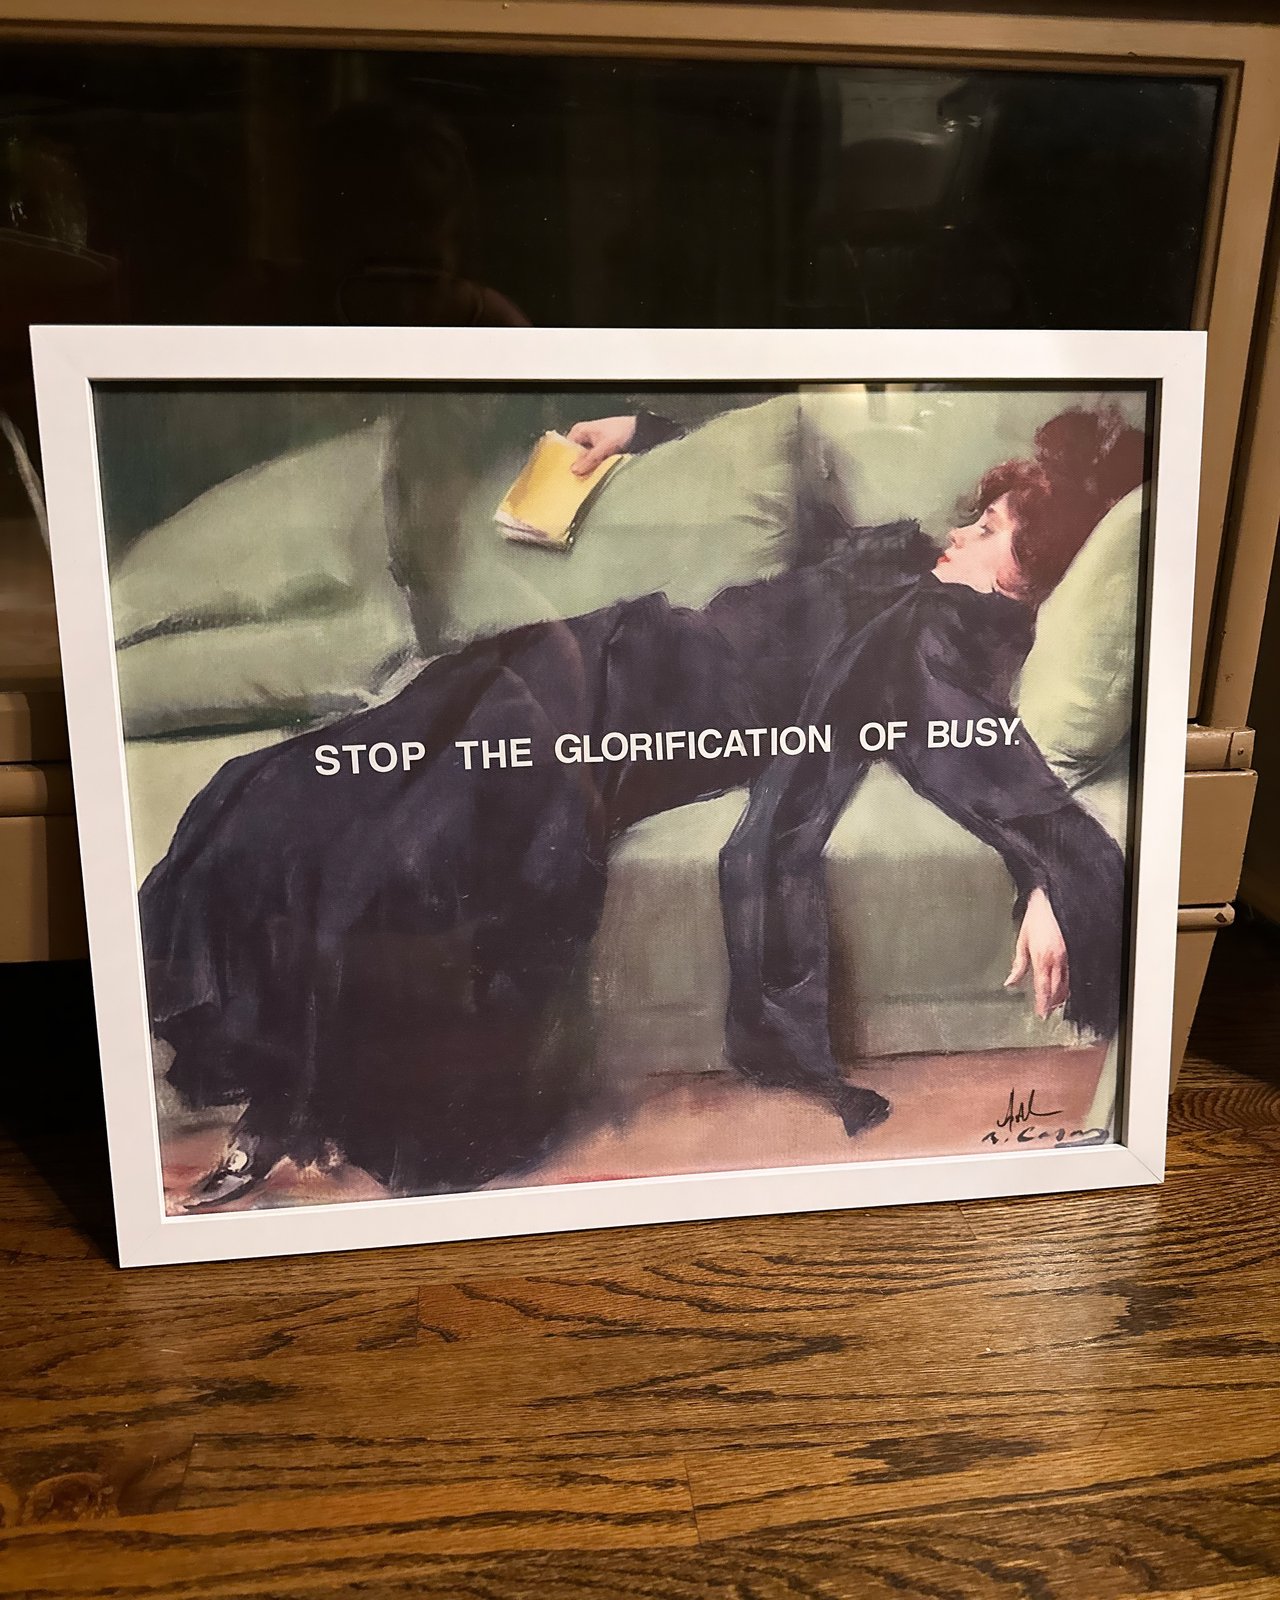 “Stop the glorification of busy”